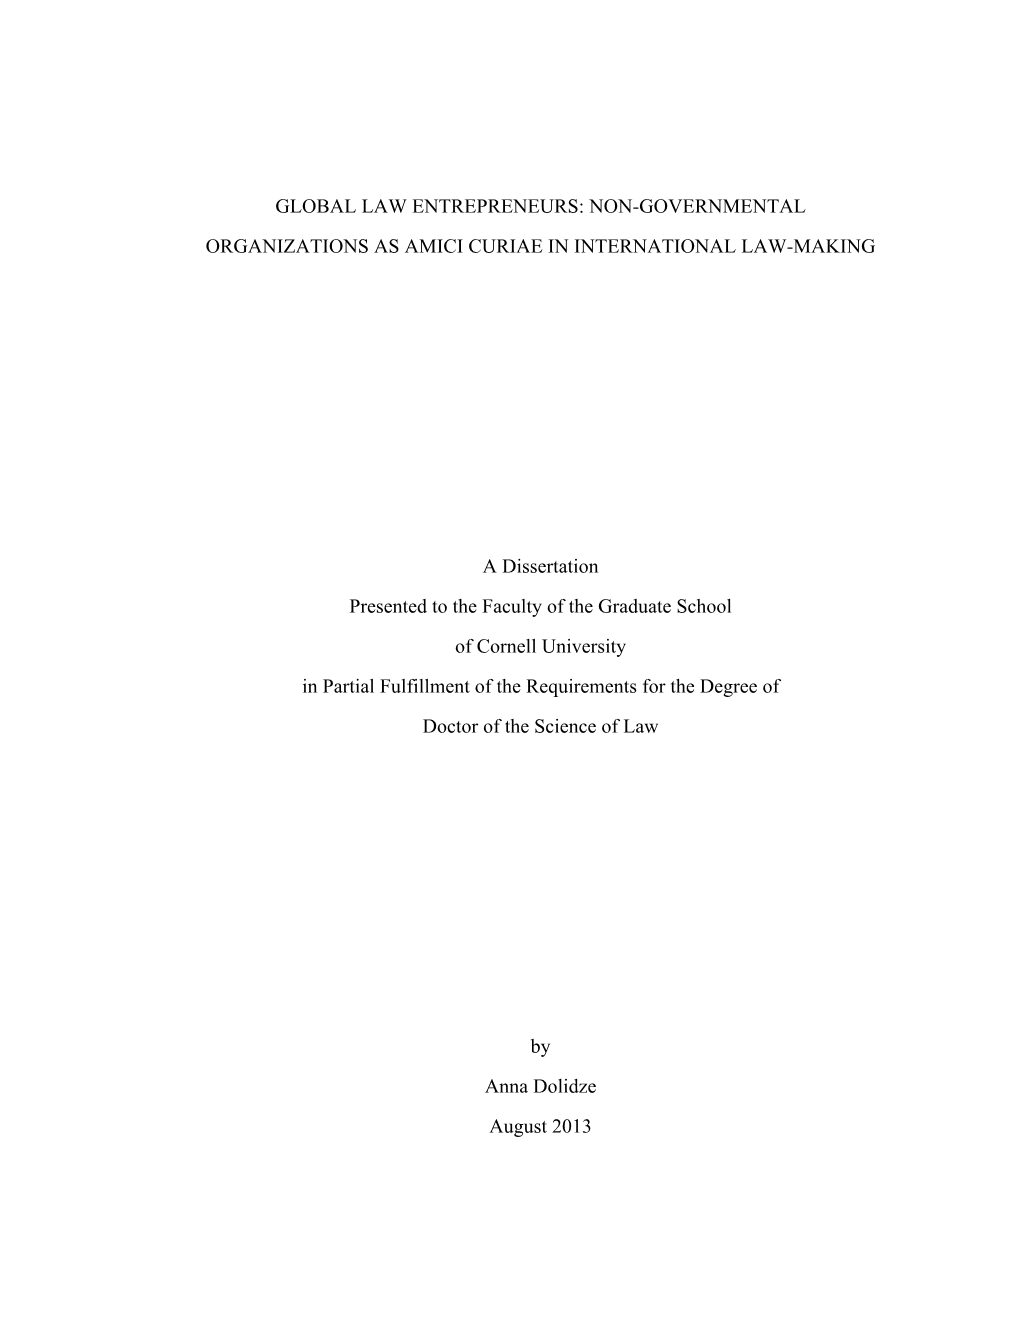 NON-GOVERNMENTAL ORGANIZATIONS AS AMICI CURIAE in INTERNATIONAL LAW-MAKING a Dissertation Presented To